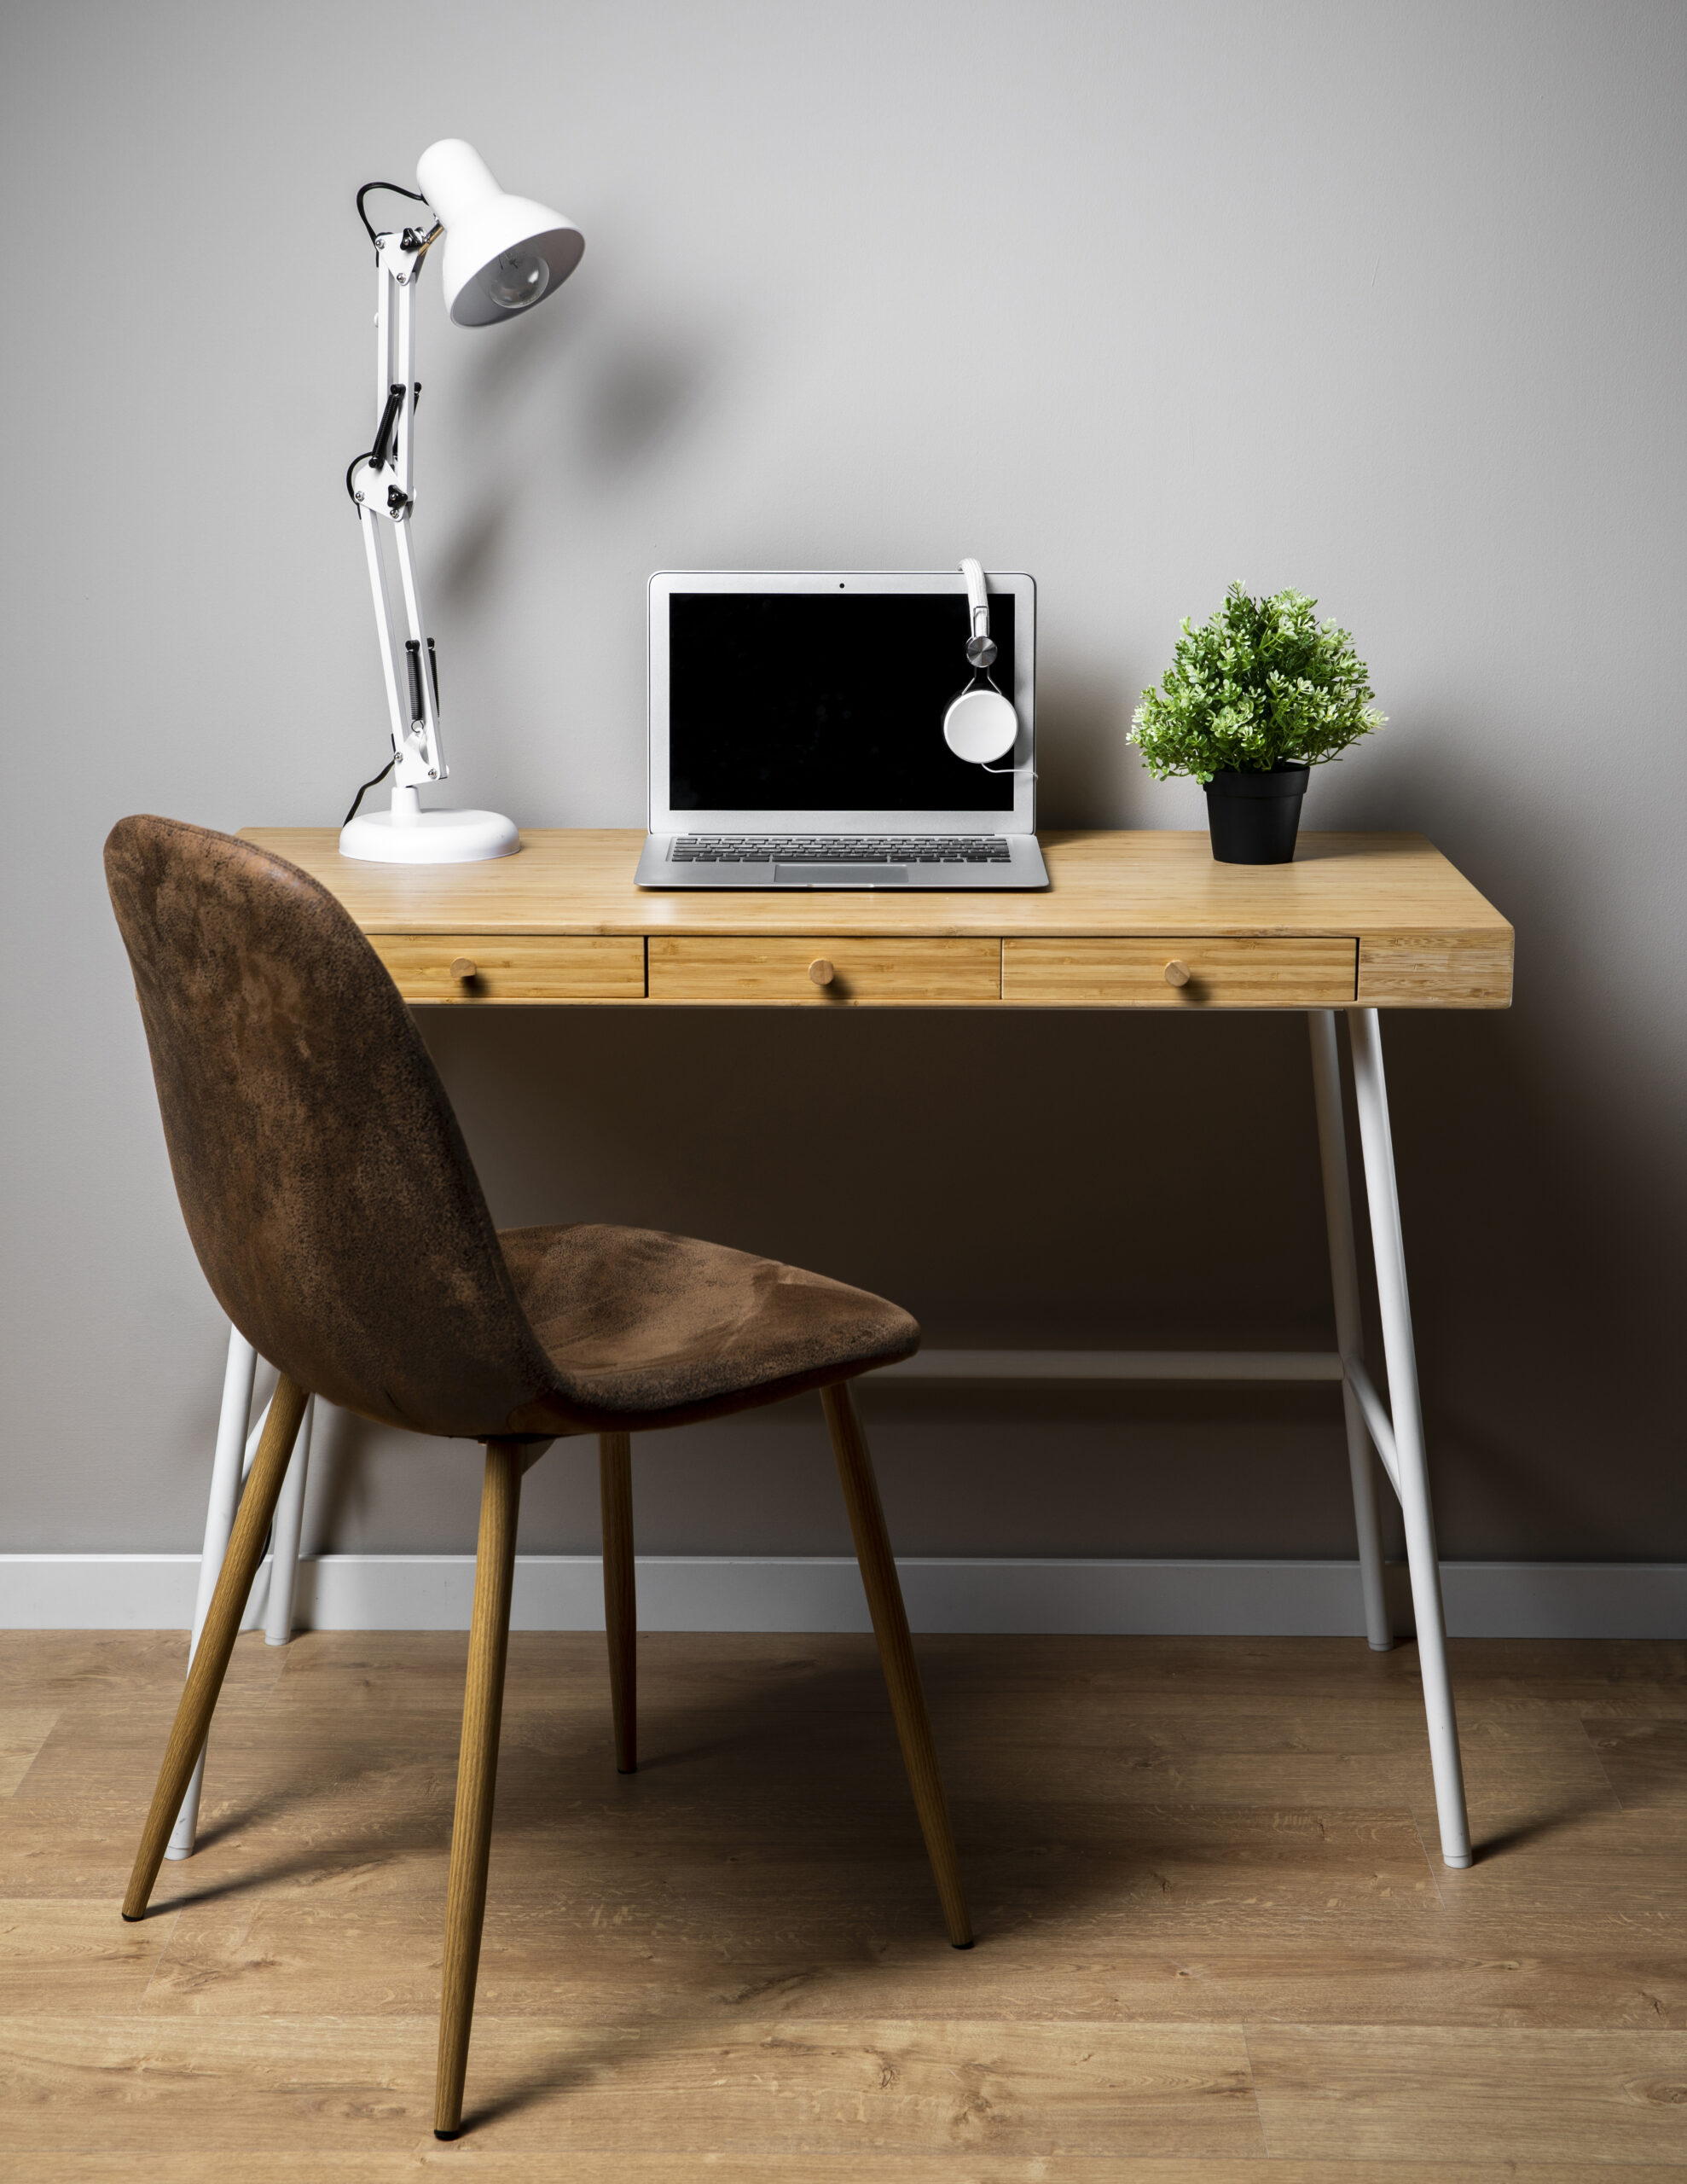 How to Pick the Best Desk for Your Home Office Furniture?